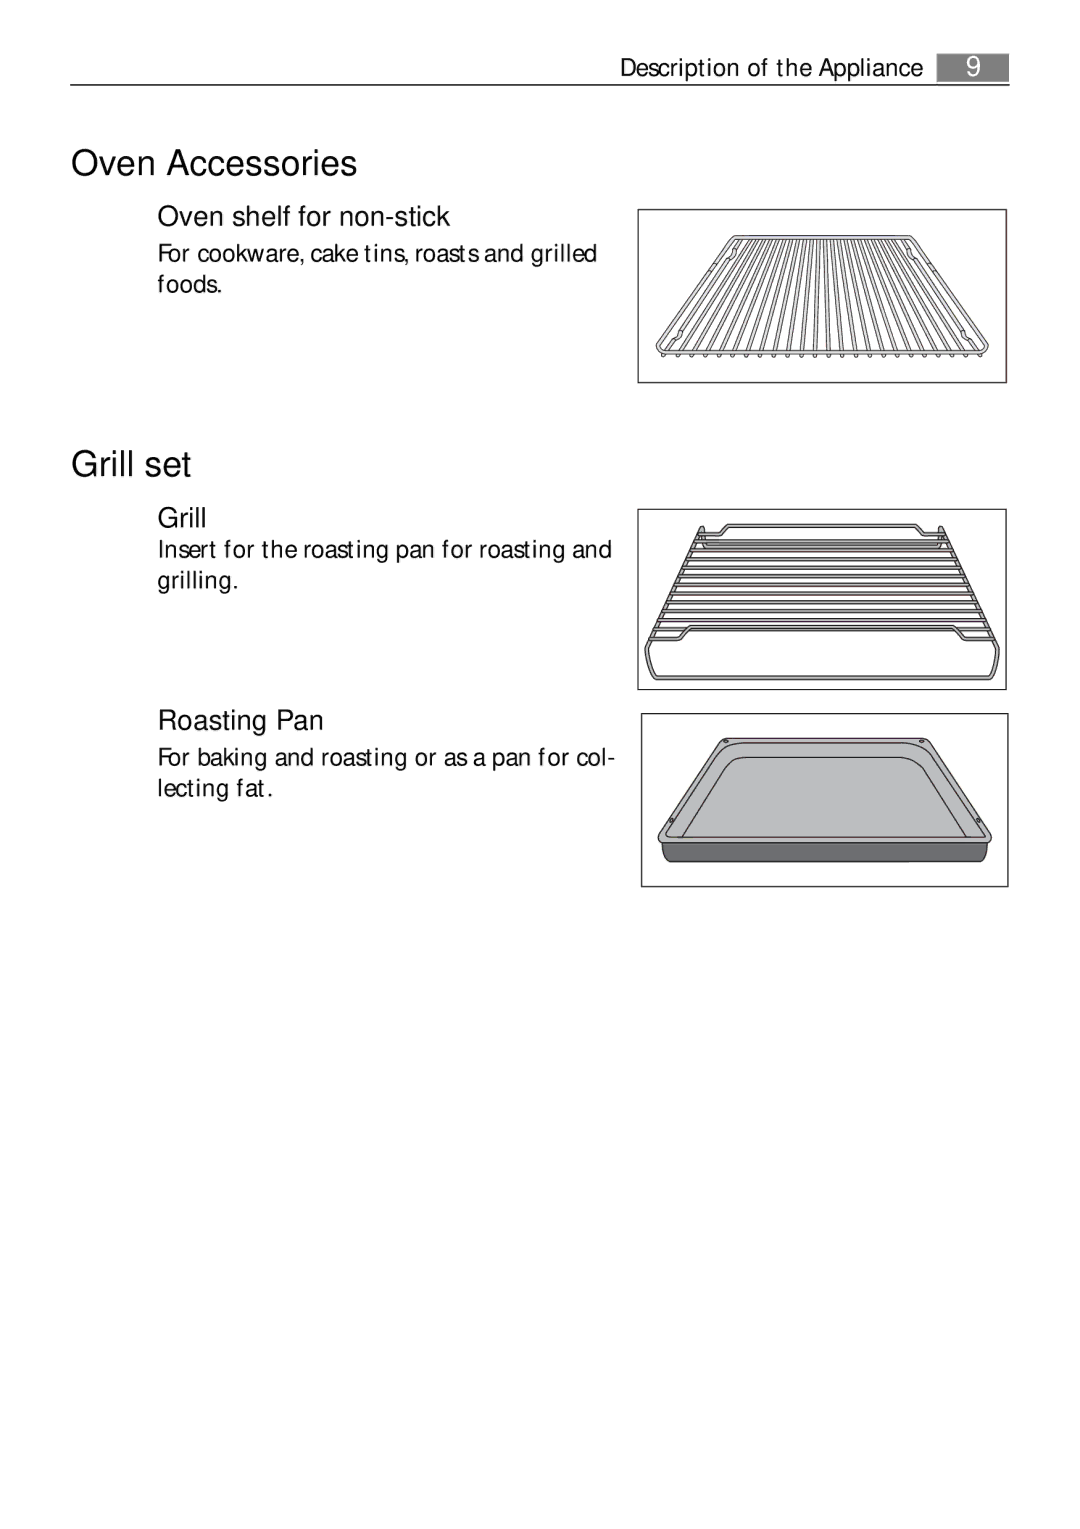 Electrolux B57415A, B57415B user manual Oven Accessories, Grill set, Oven shelf for non-stick, Roasting Pan 